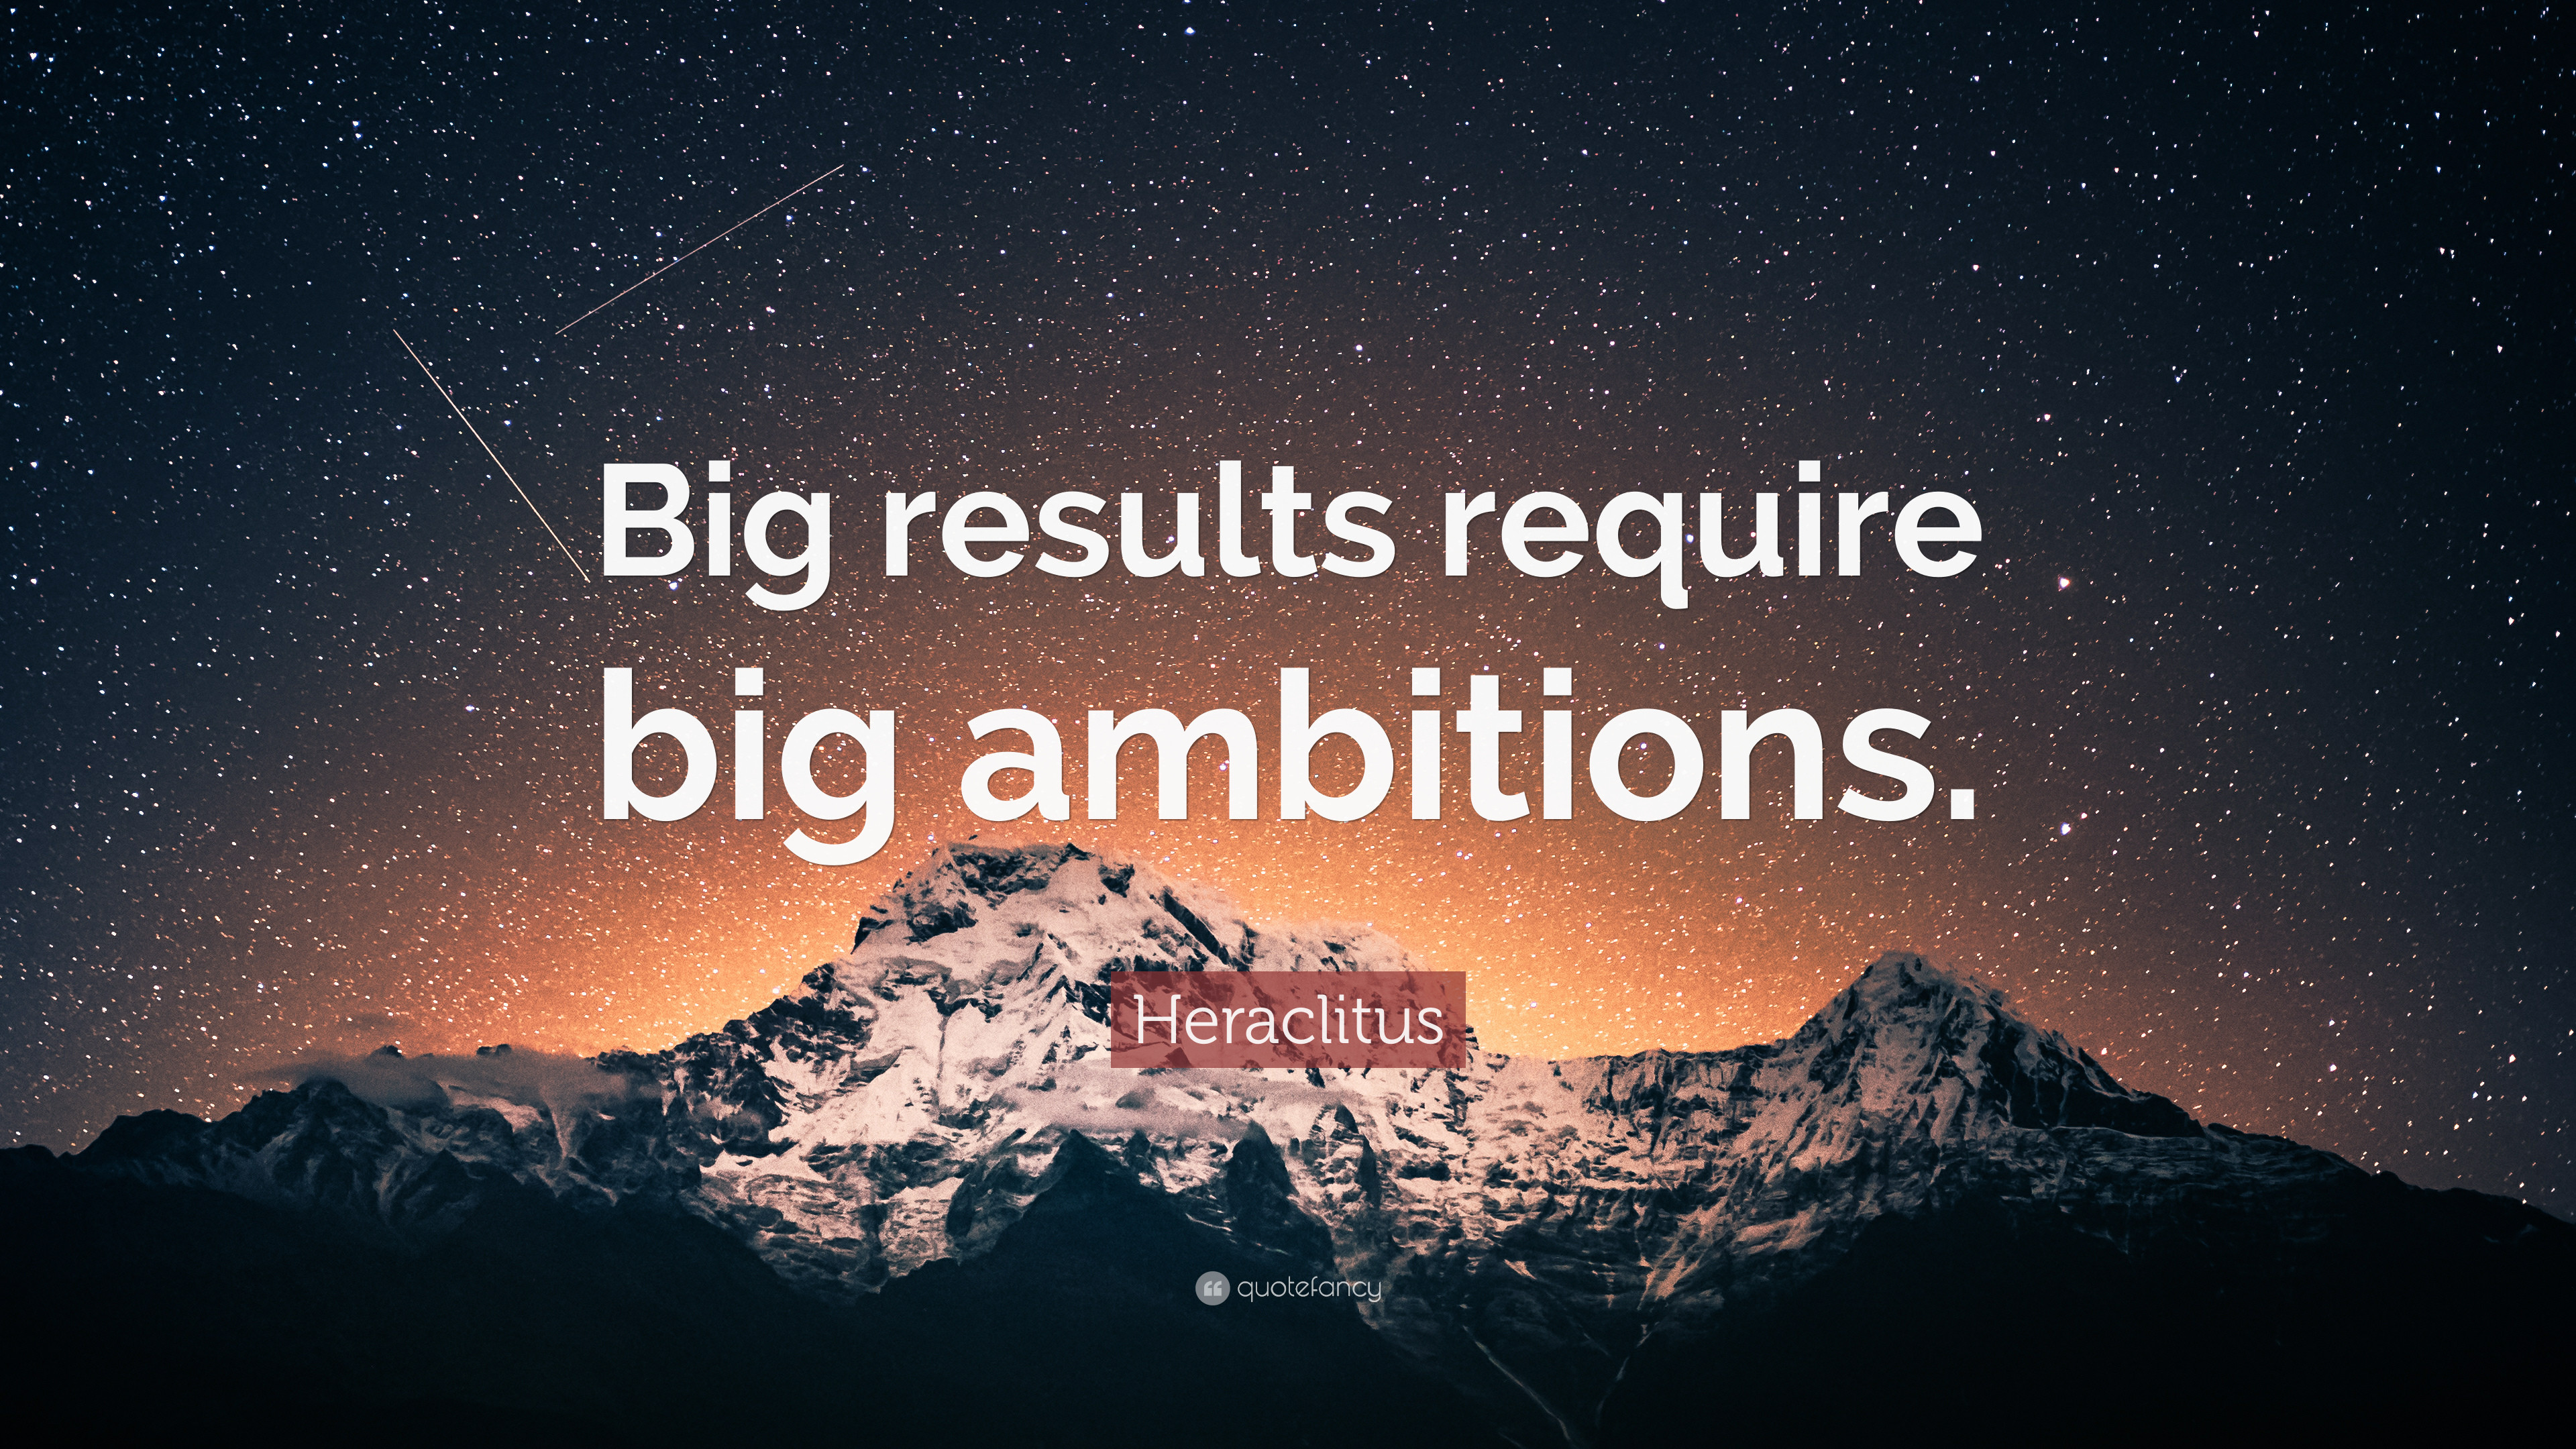 3840x2160 Business Quotes: “Big results require big ambitions.” — Heraclitus